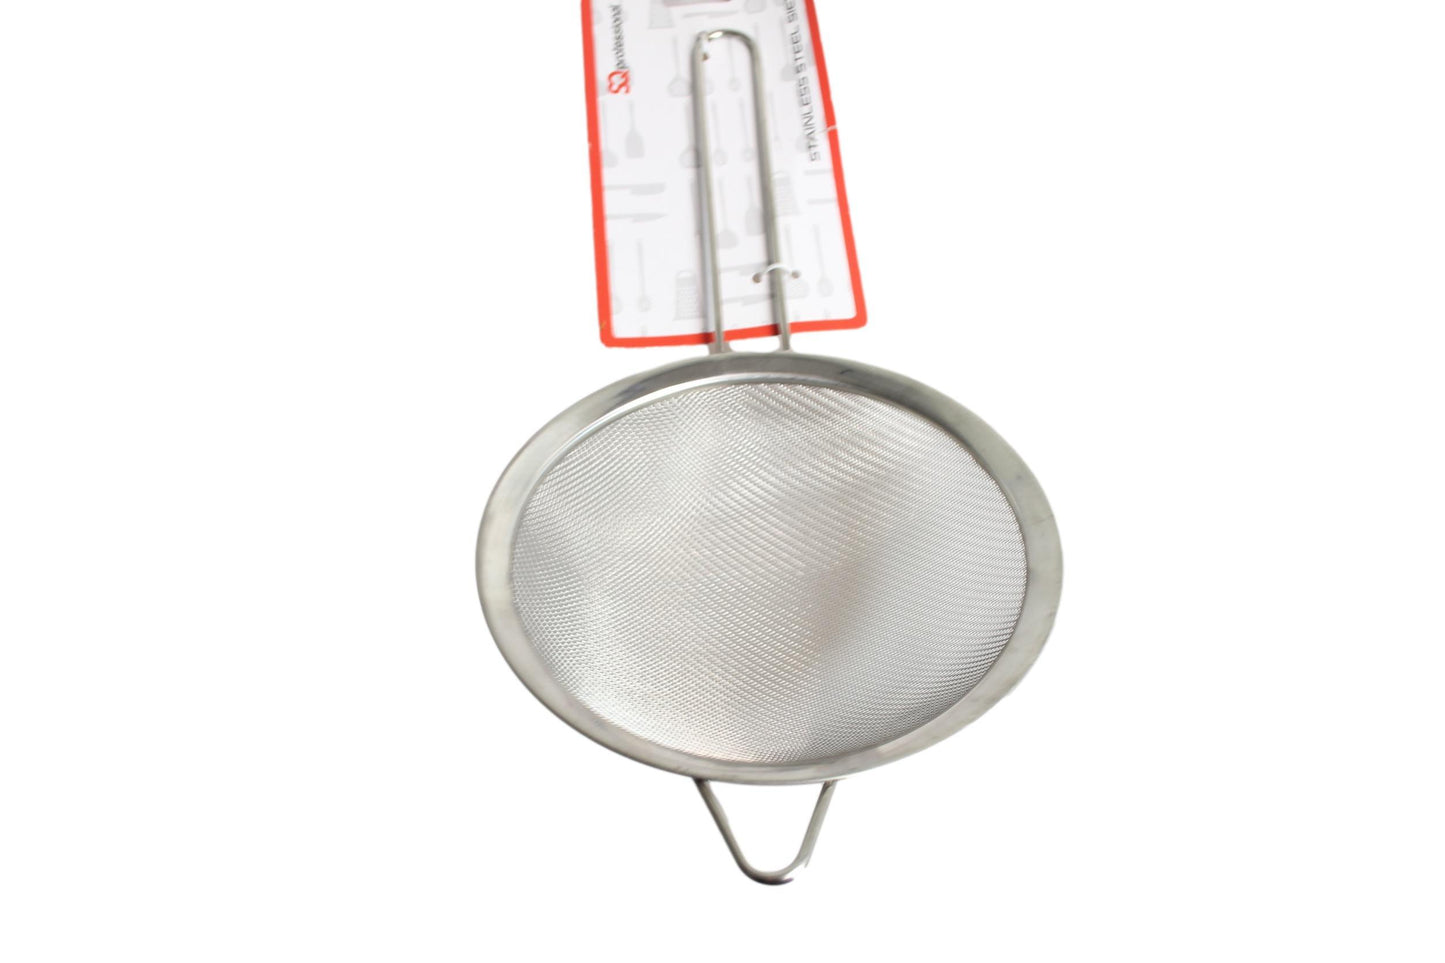 Stainless Steel Sieve Fine Mesh Strainer For Pasta Rice Sifting Flour Sugar Tea Icing 18x6cm 95g 3348 (Parcel Rate)